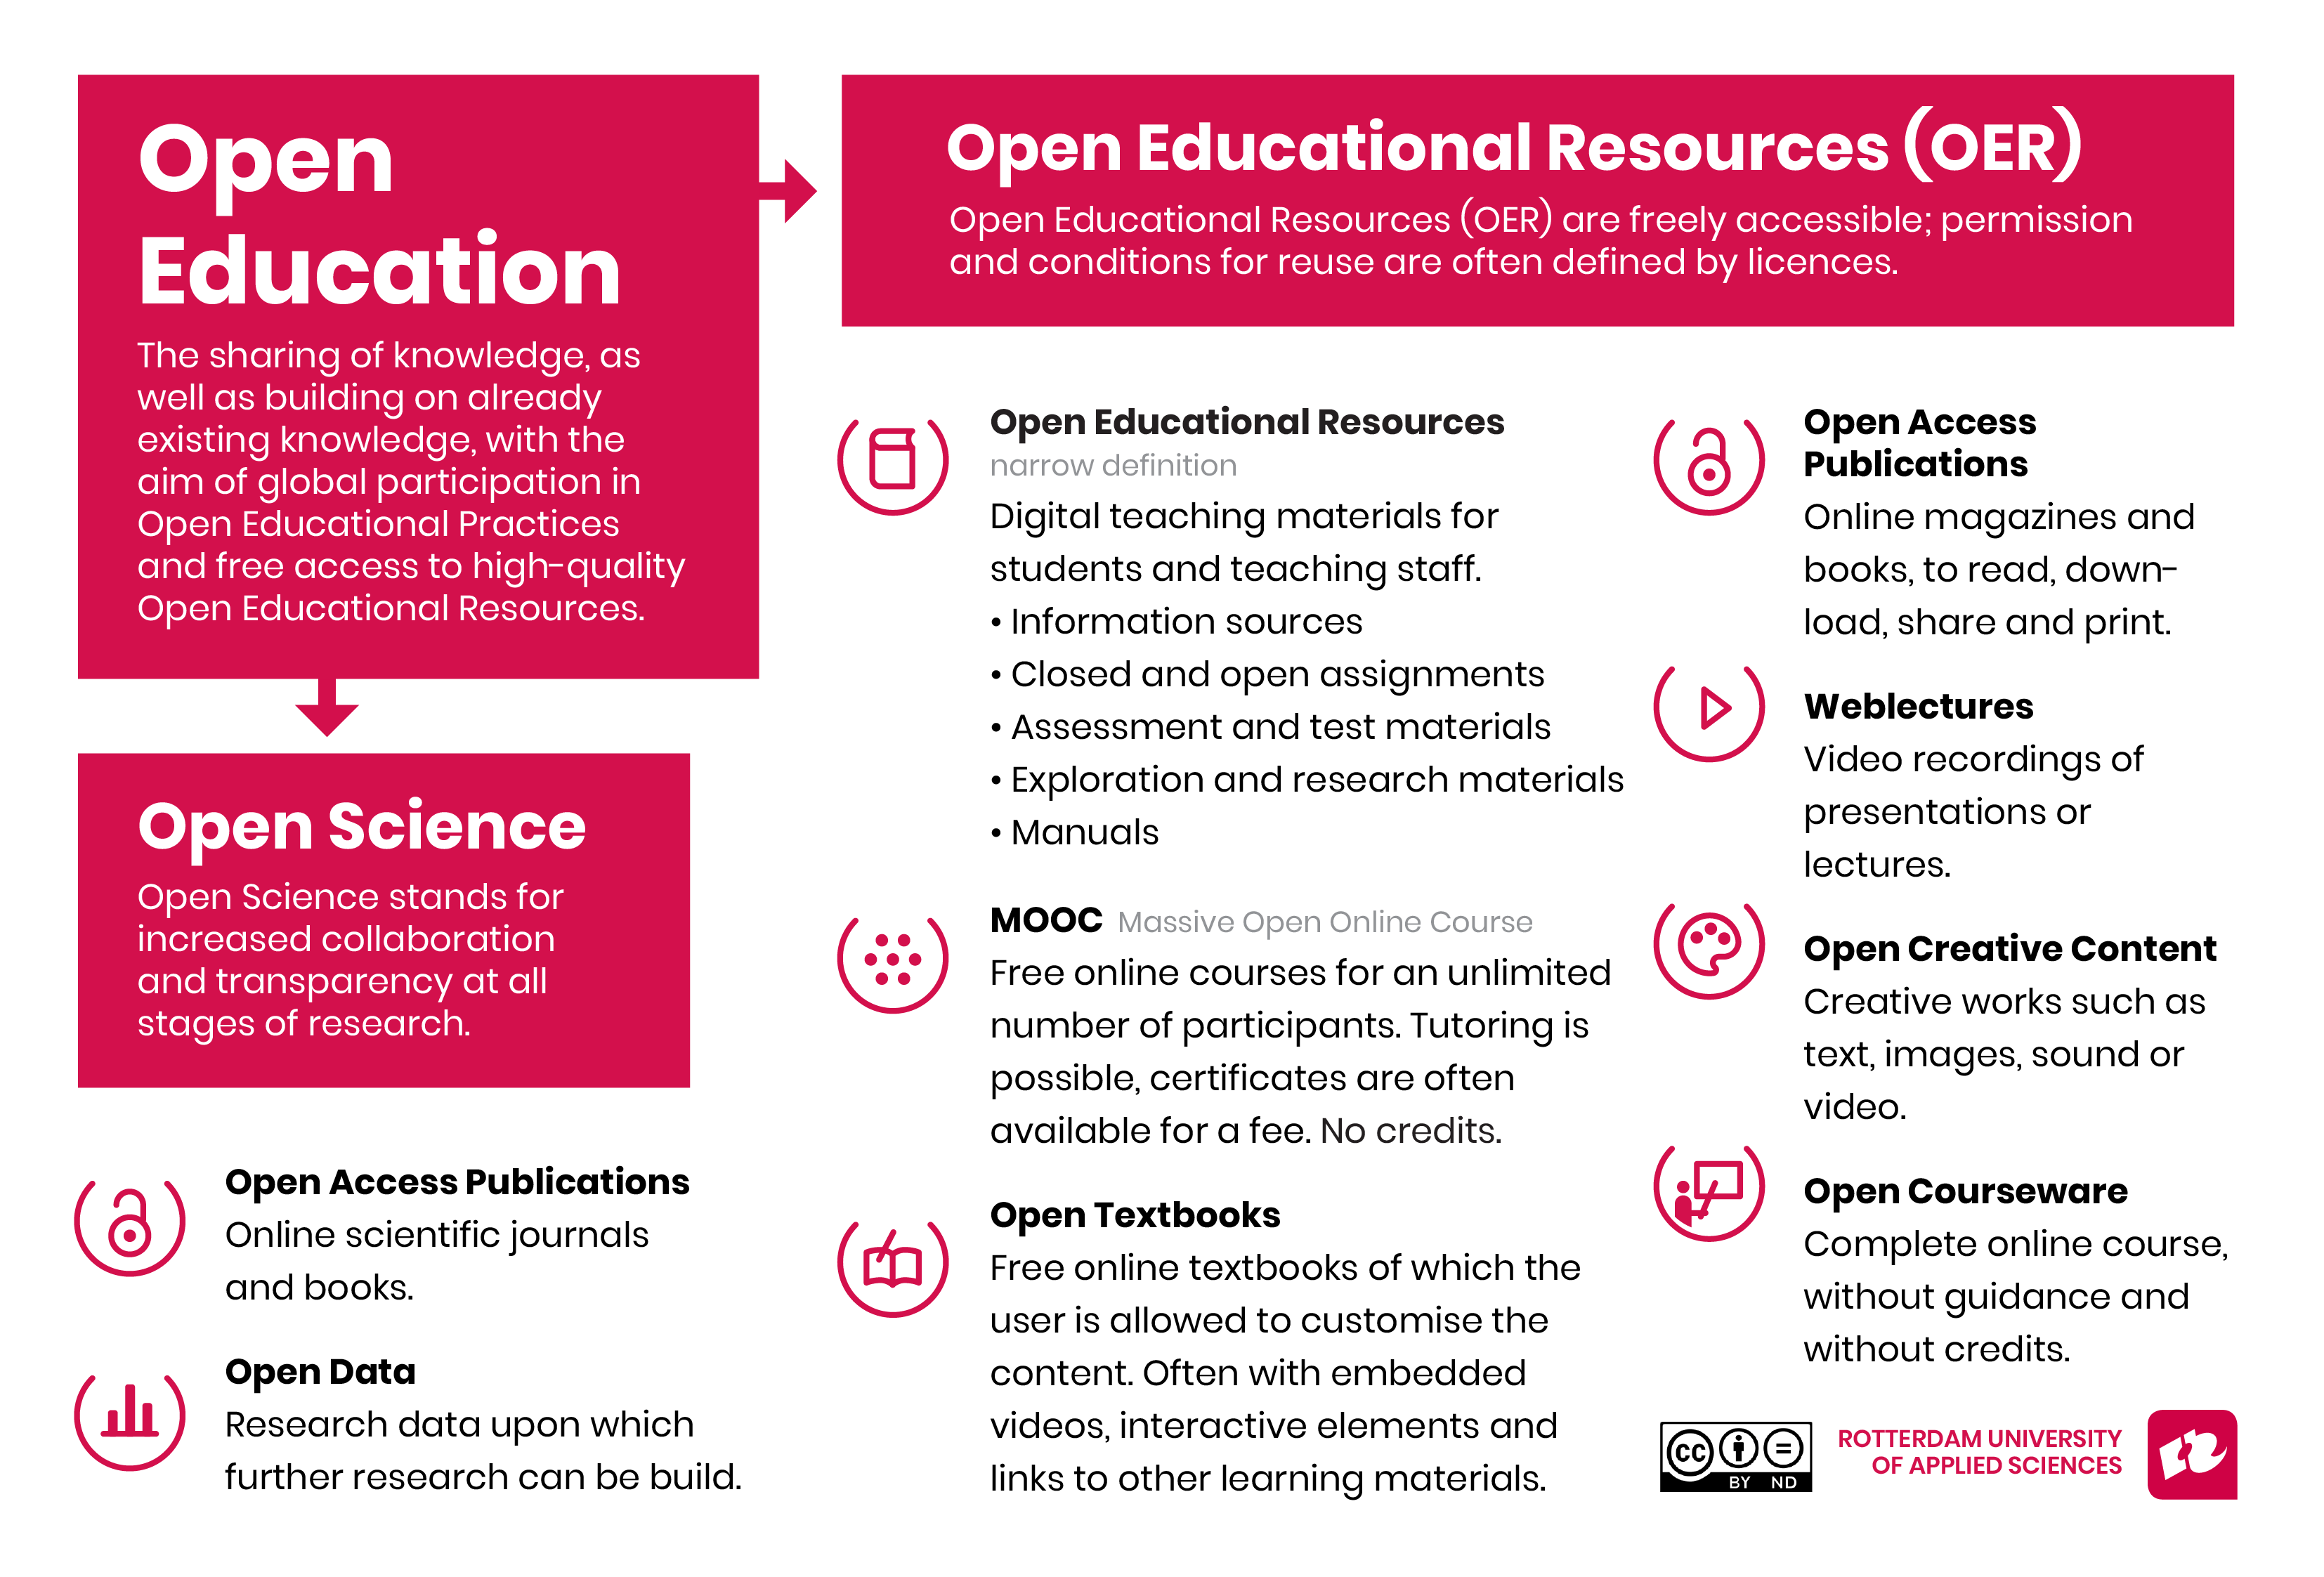 Open Education infographic 